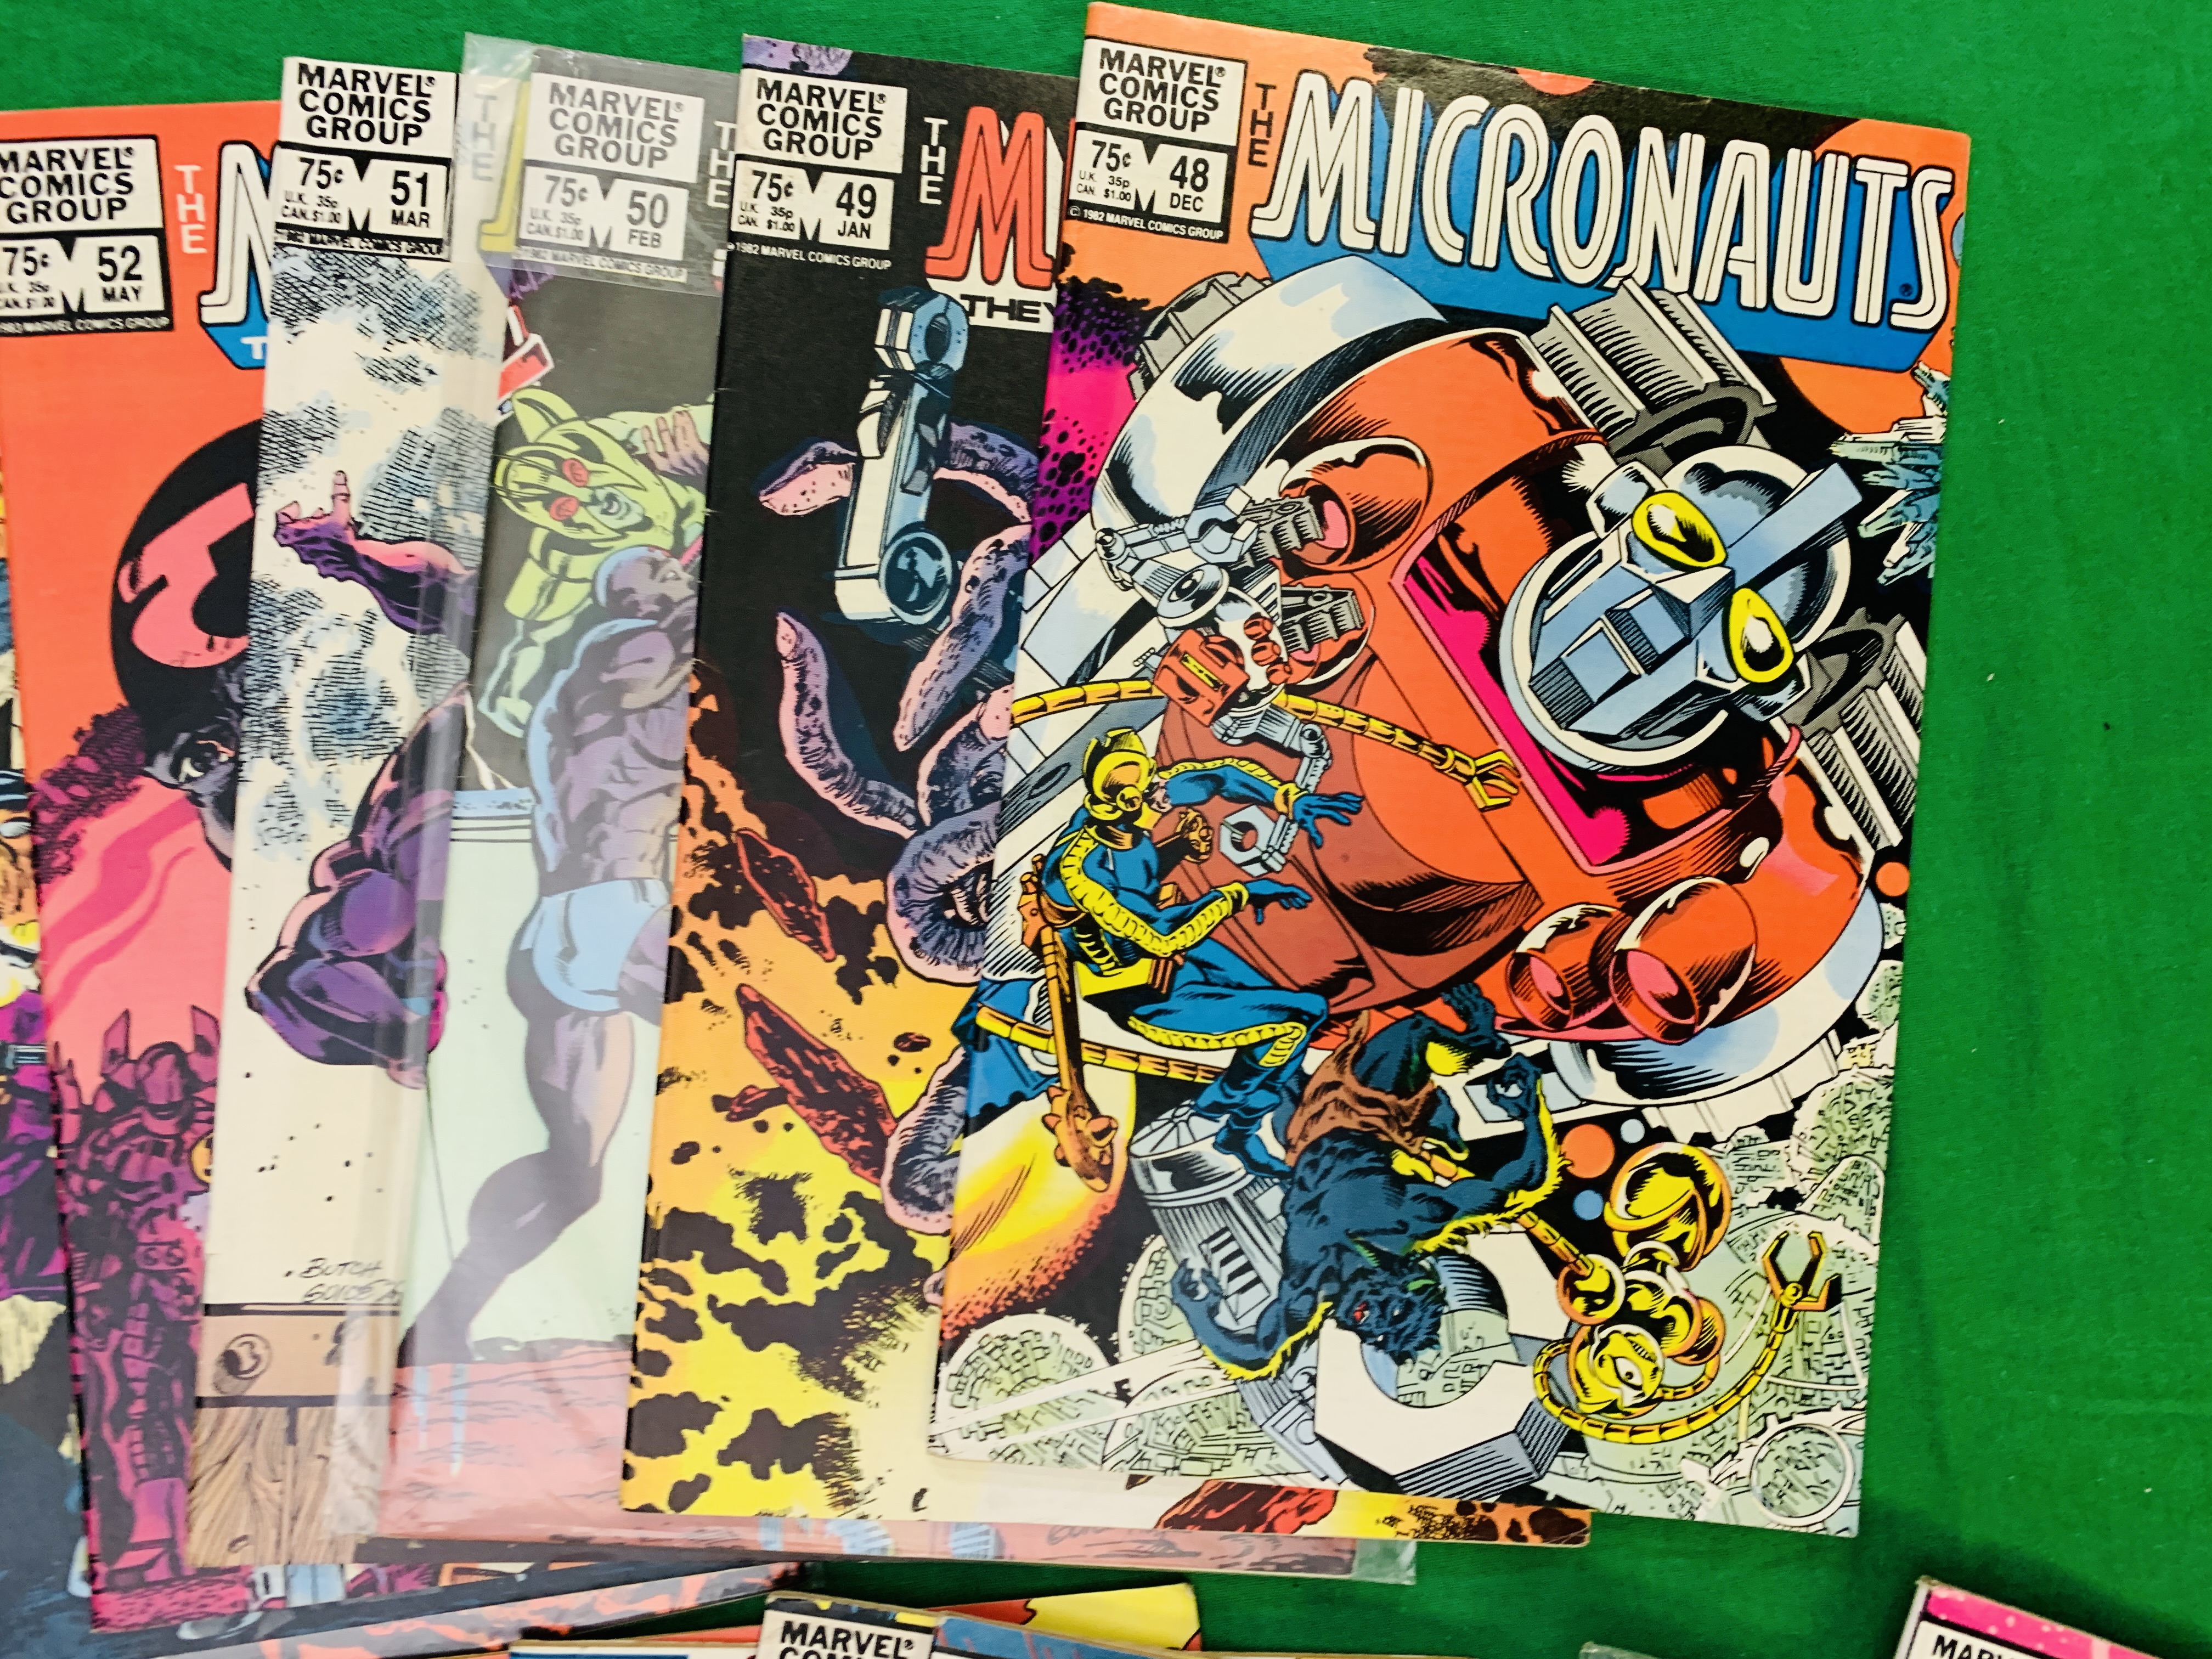 MARVEL COMICS THE MICRONAUTS NO. 1 - 59 FROM 1979. NO. 18 - 19, 21, 37, 53, 57 HAVE RUSTY STAPLES. - Image 26 of 27